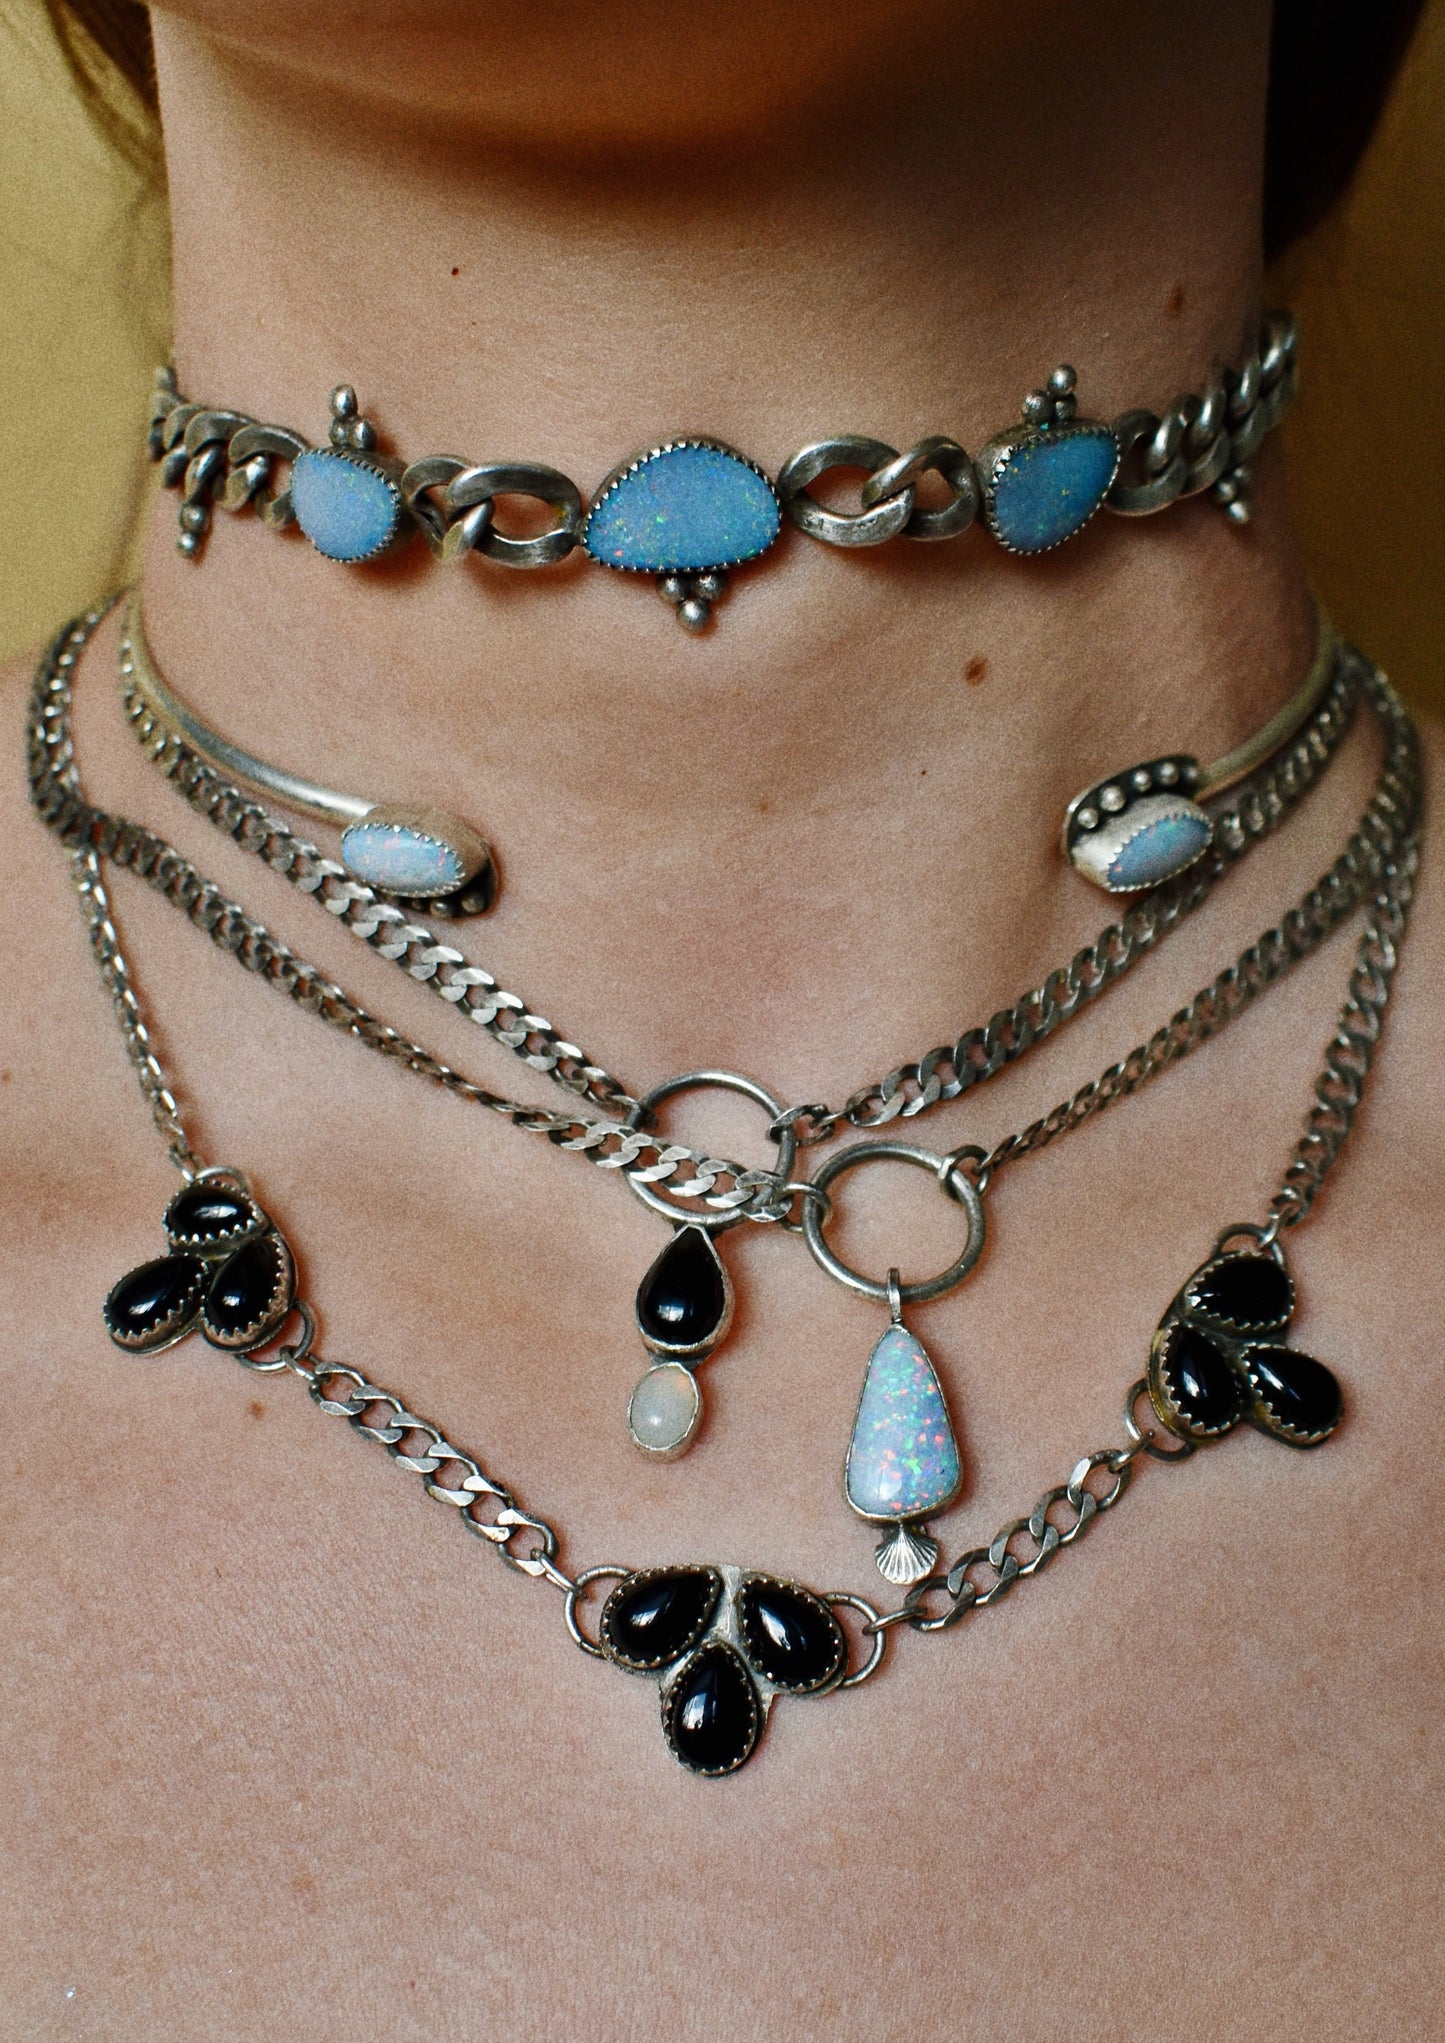 opposites attract necklace (opal & onyx)